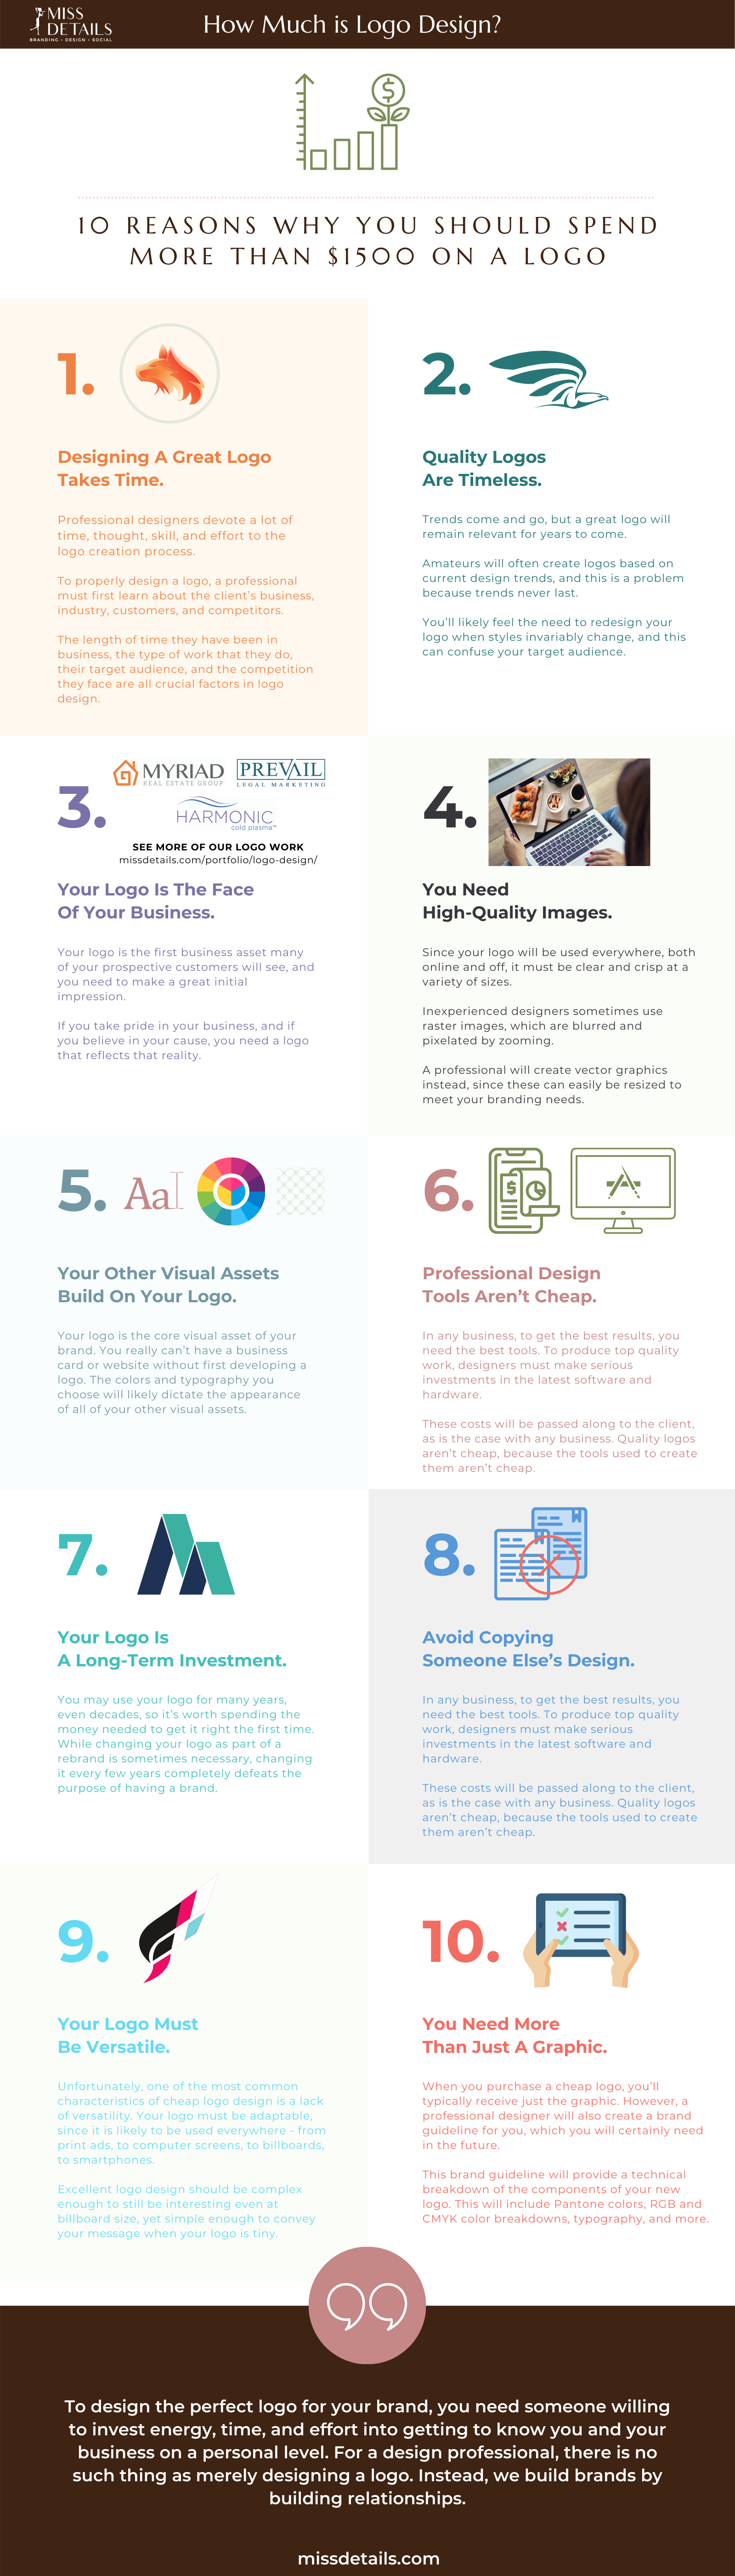 infographic how much is a logo design